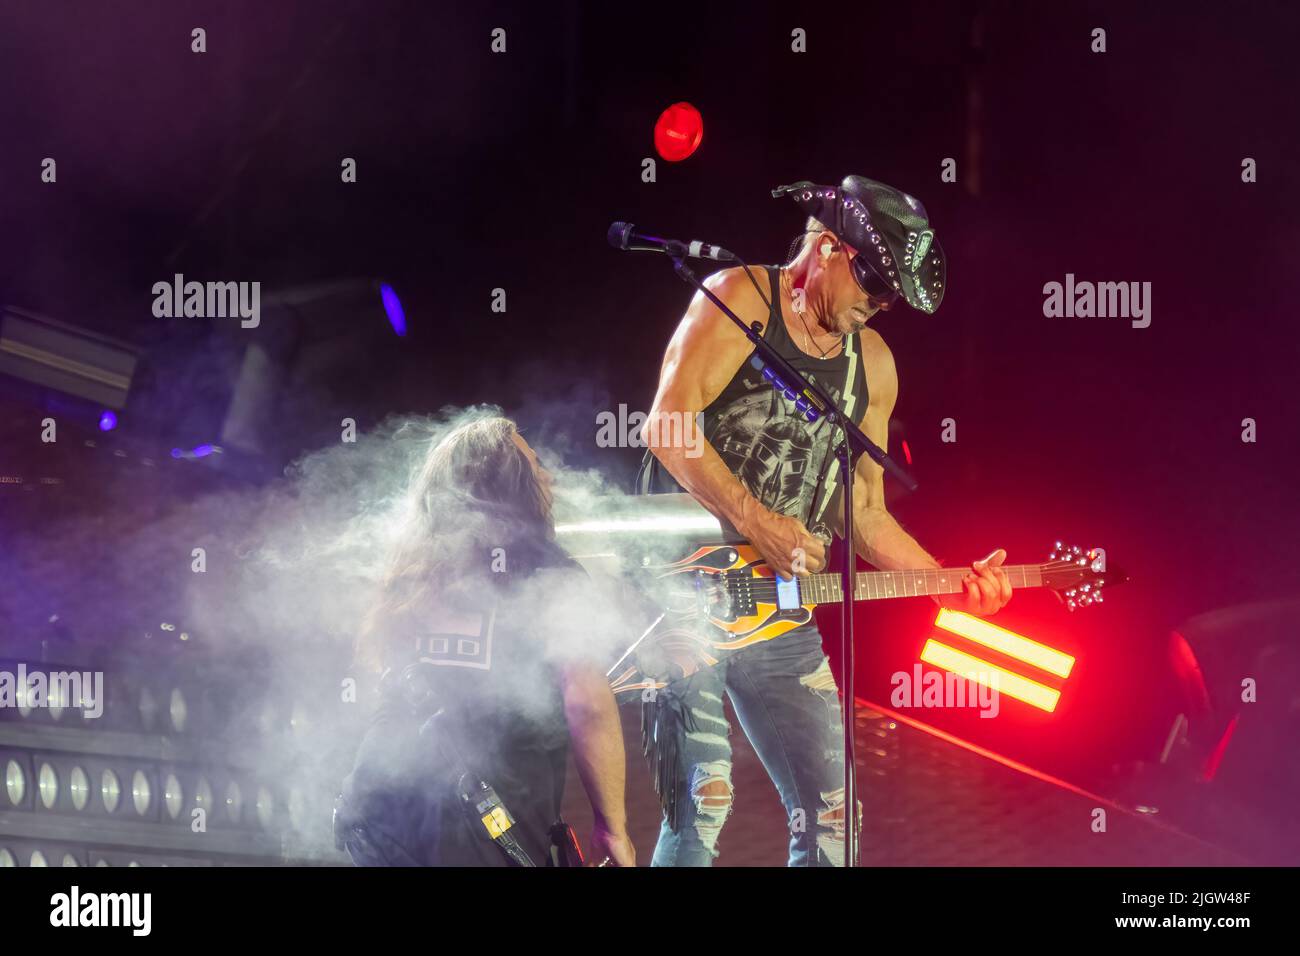 Athens, Greece 6 July 2022. Rudolf Schenker in actions from the show of Scorpions in Greece. Close up view. Stock Photo